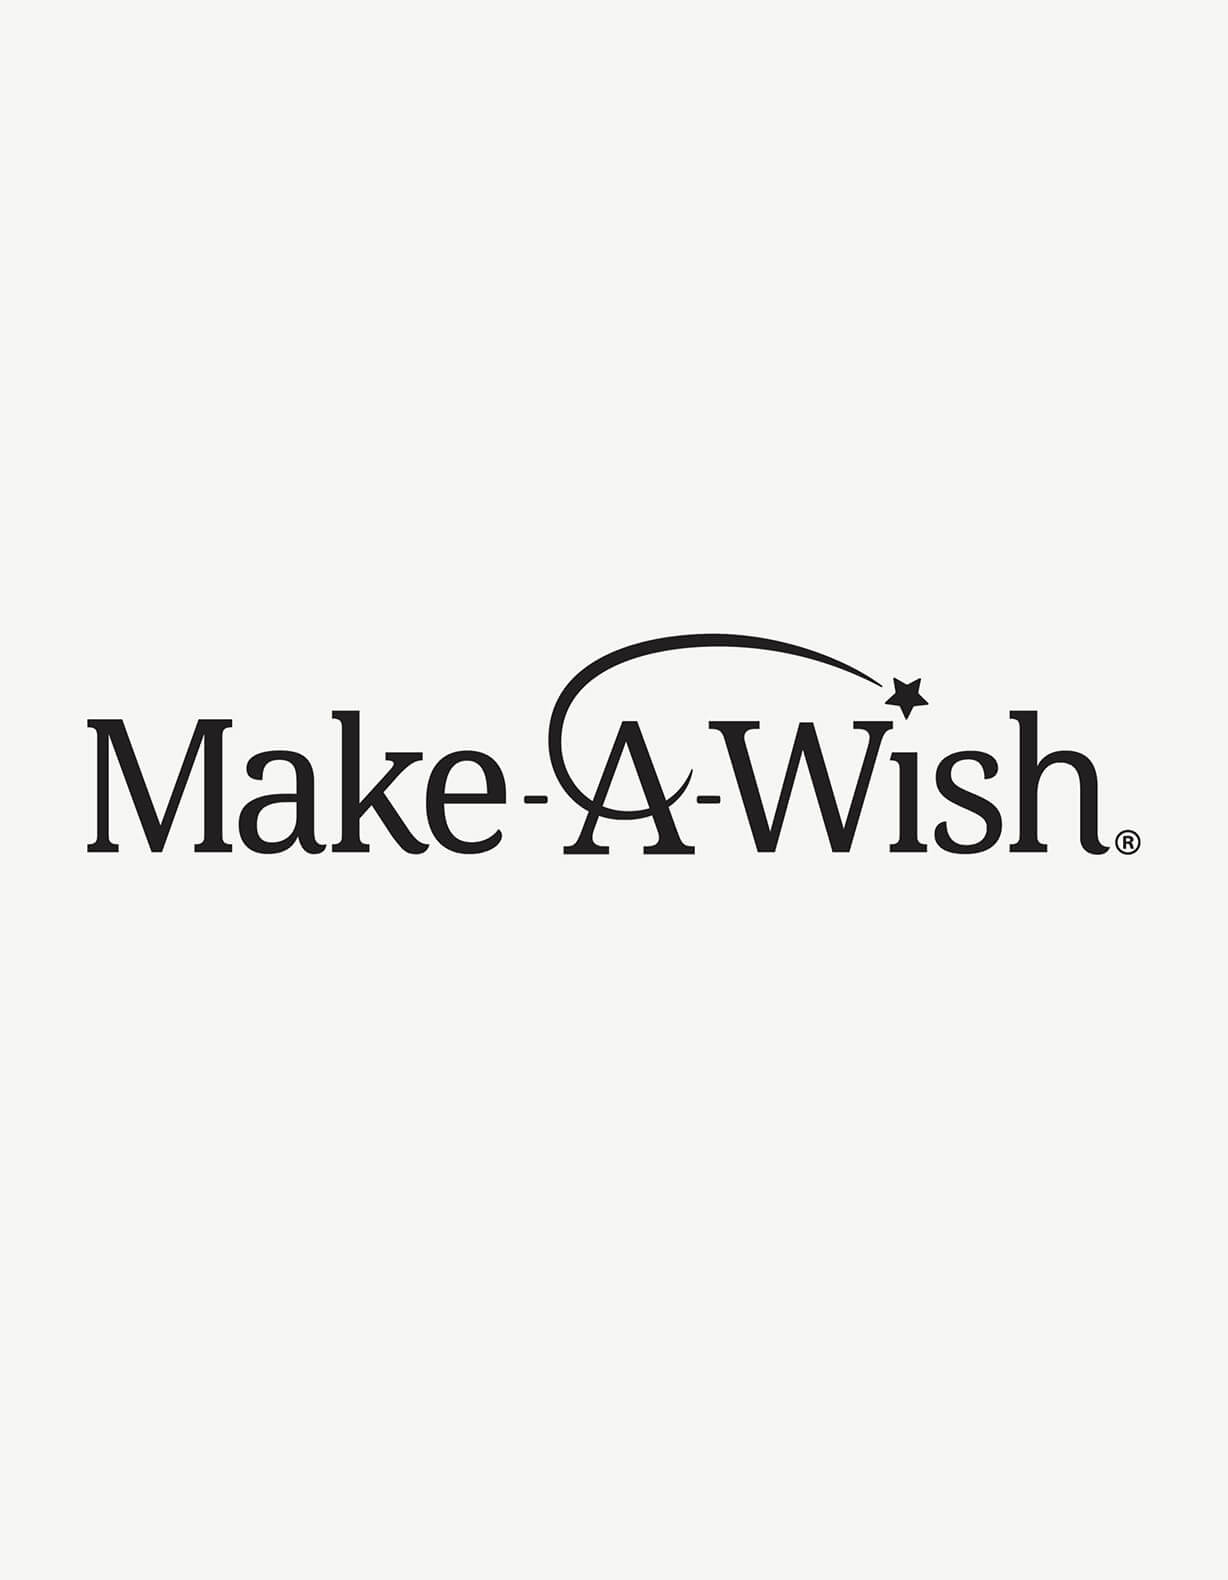 Delicato Family Vineyards and Make-A-Wish® Greater Bay Area Announce 13 Dream Trips